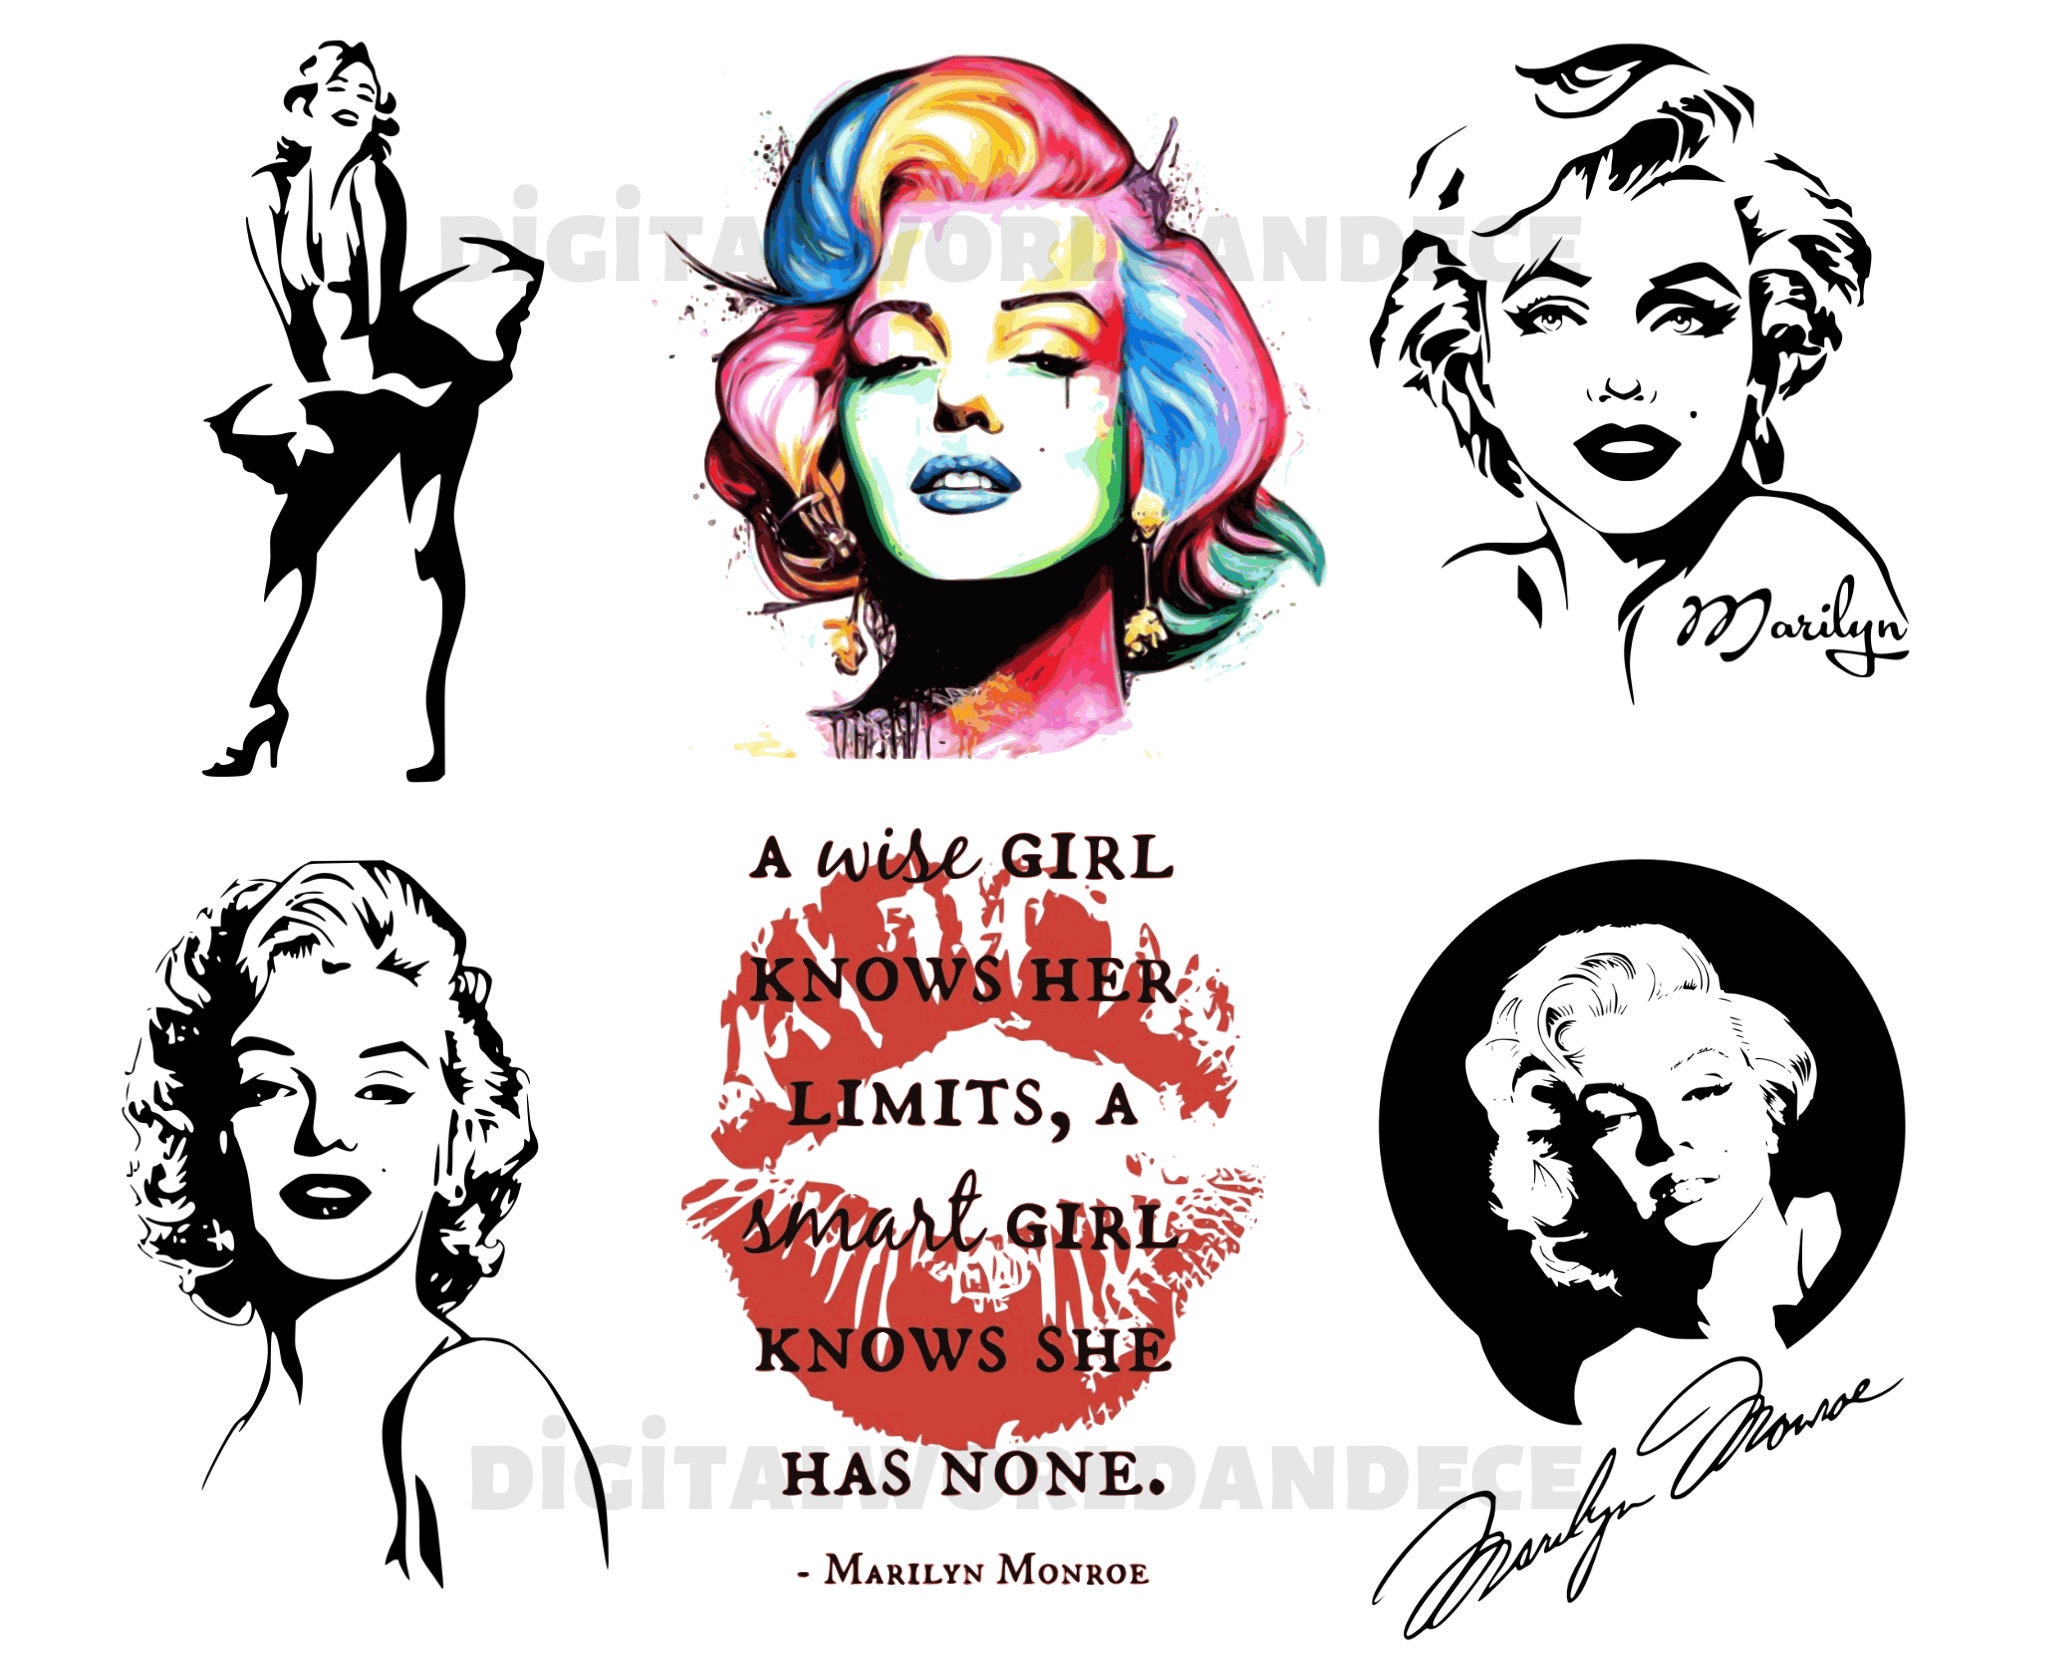 Marilyn Monroe Svg A Wise Girl Knows Her Limits , a Smart Girl